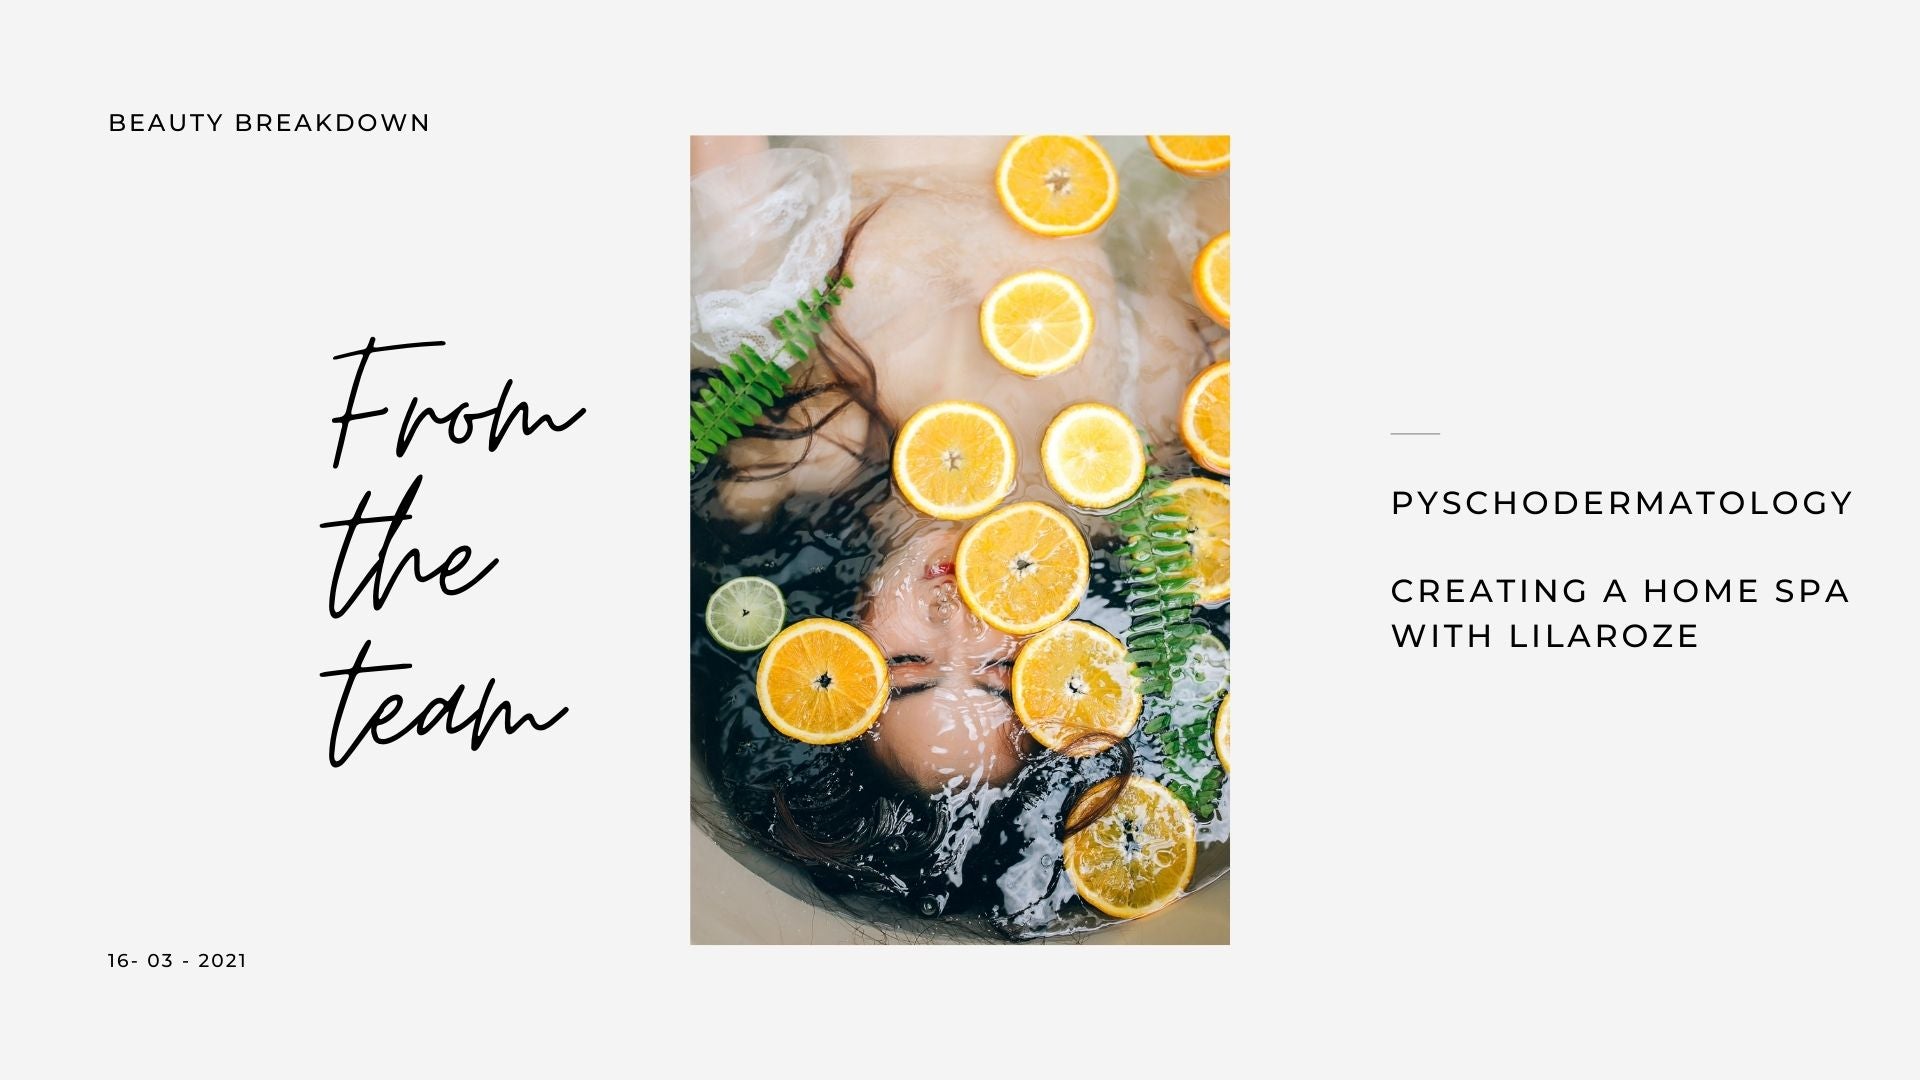 Psychodermatology – Creating a Home Spa experience